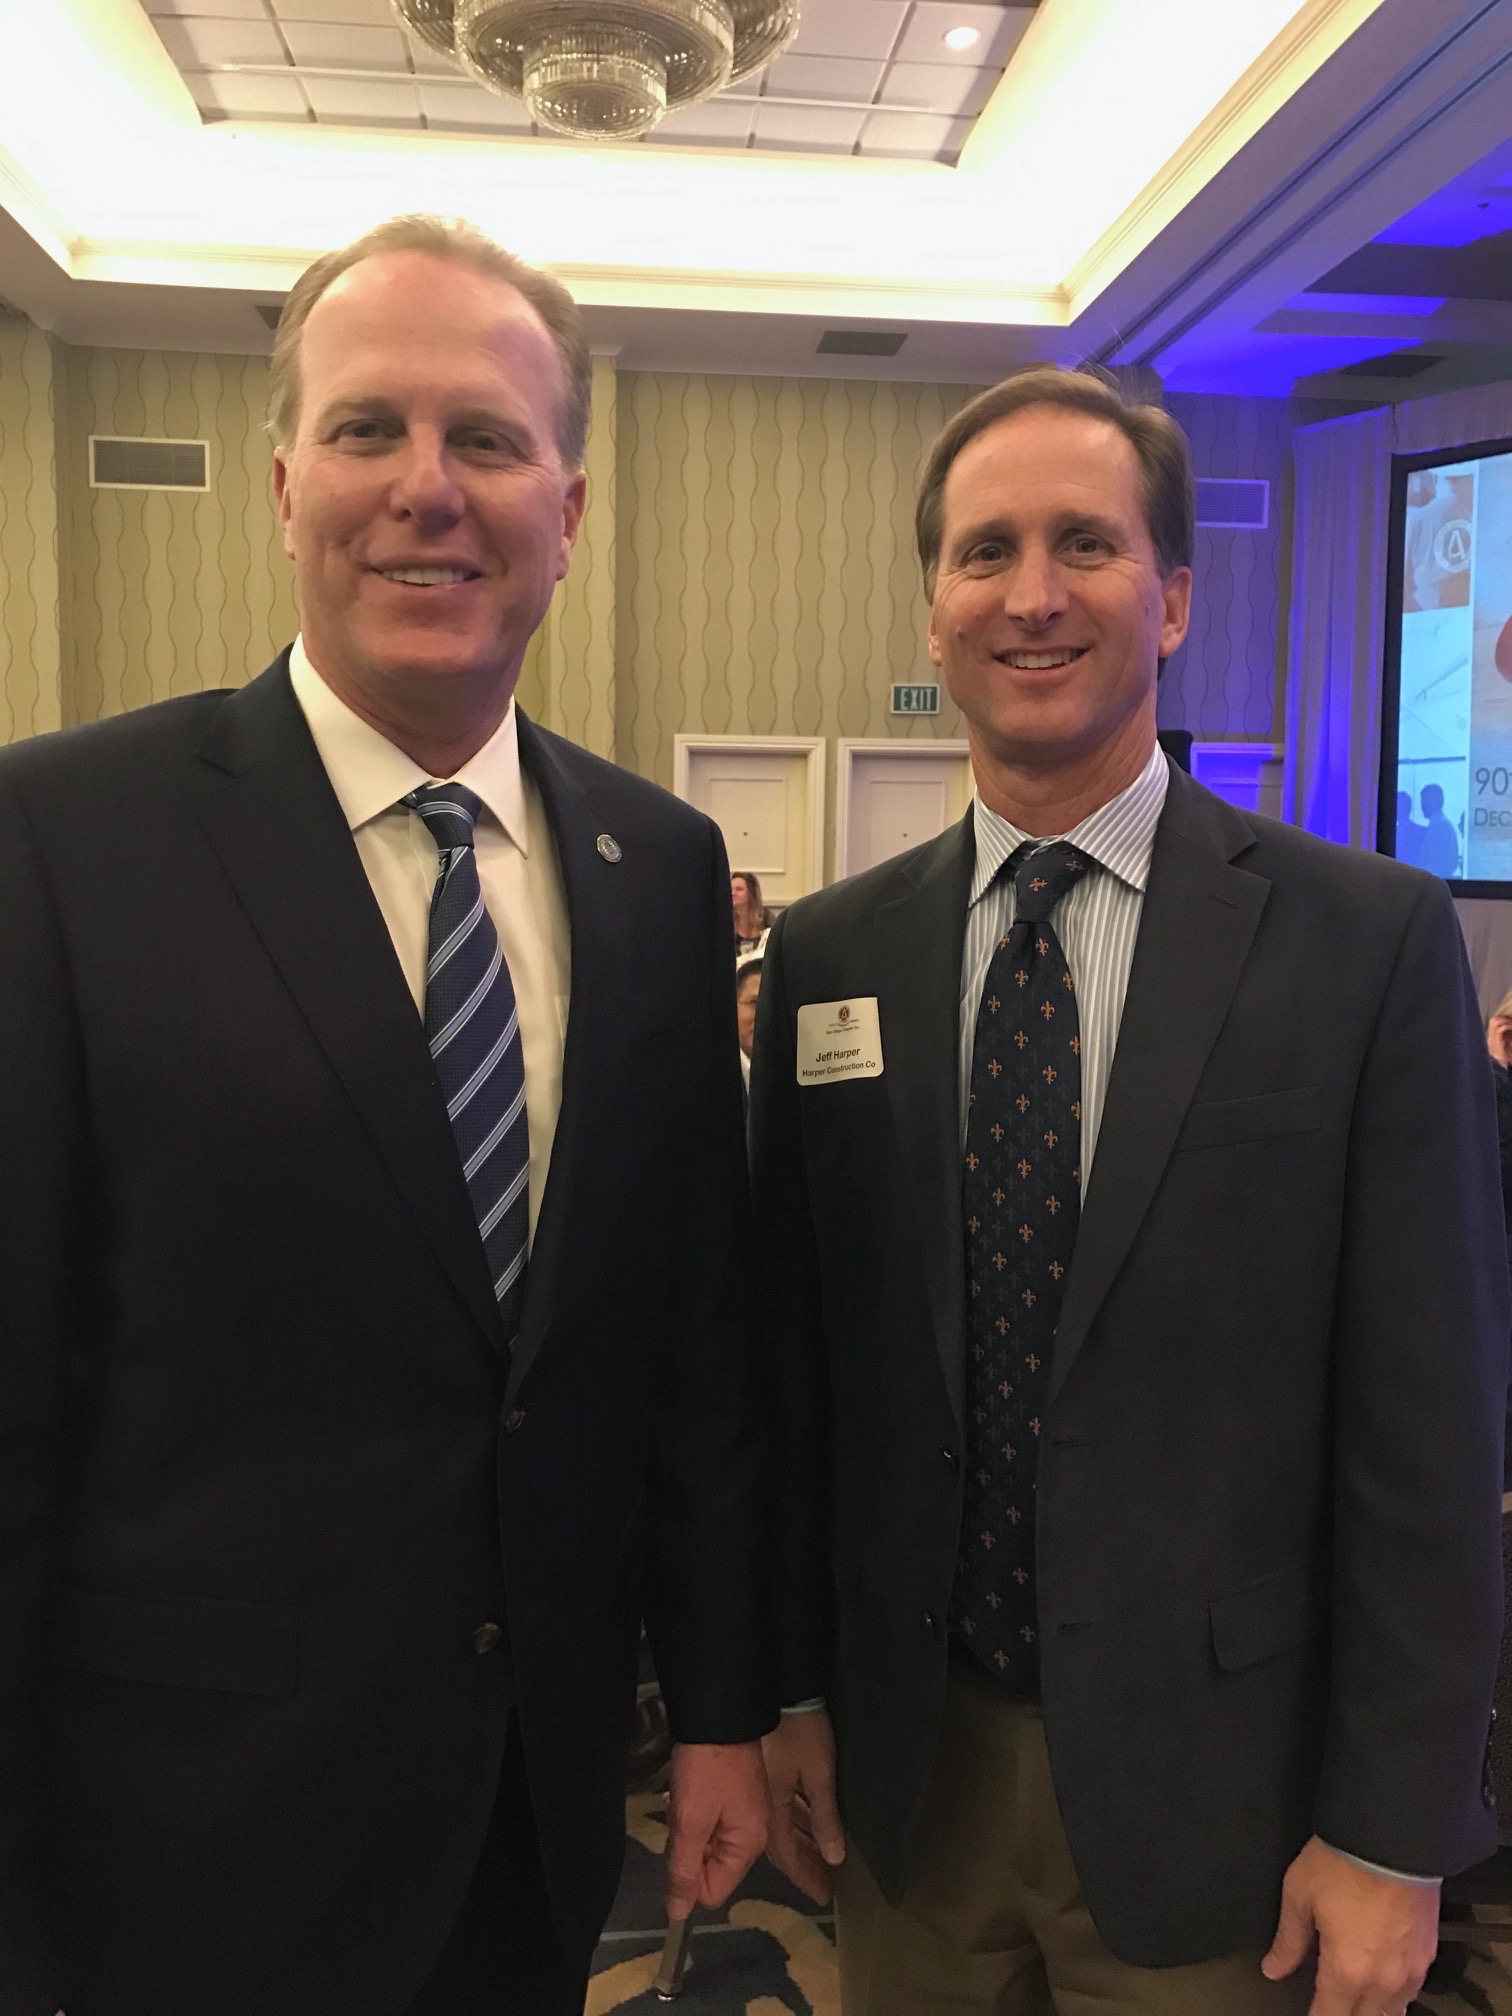 Jeff Harper with San Diego Mayor, Kevin Faulconer